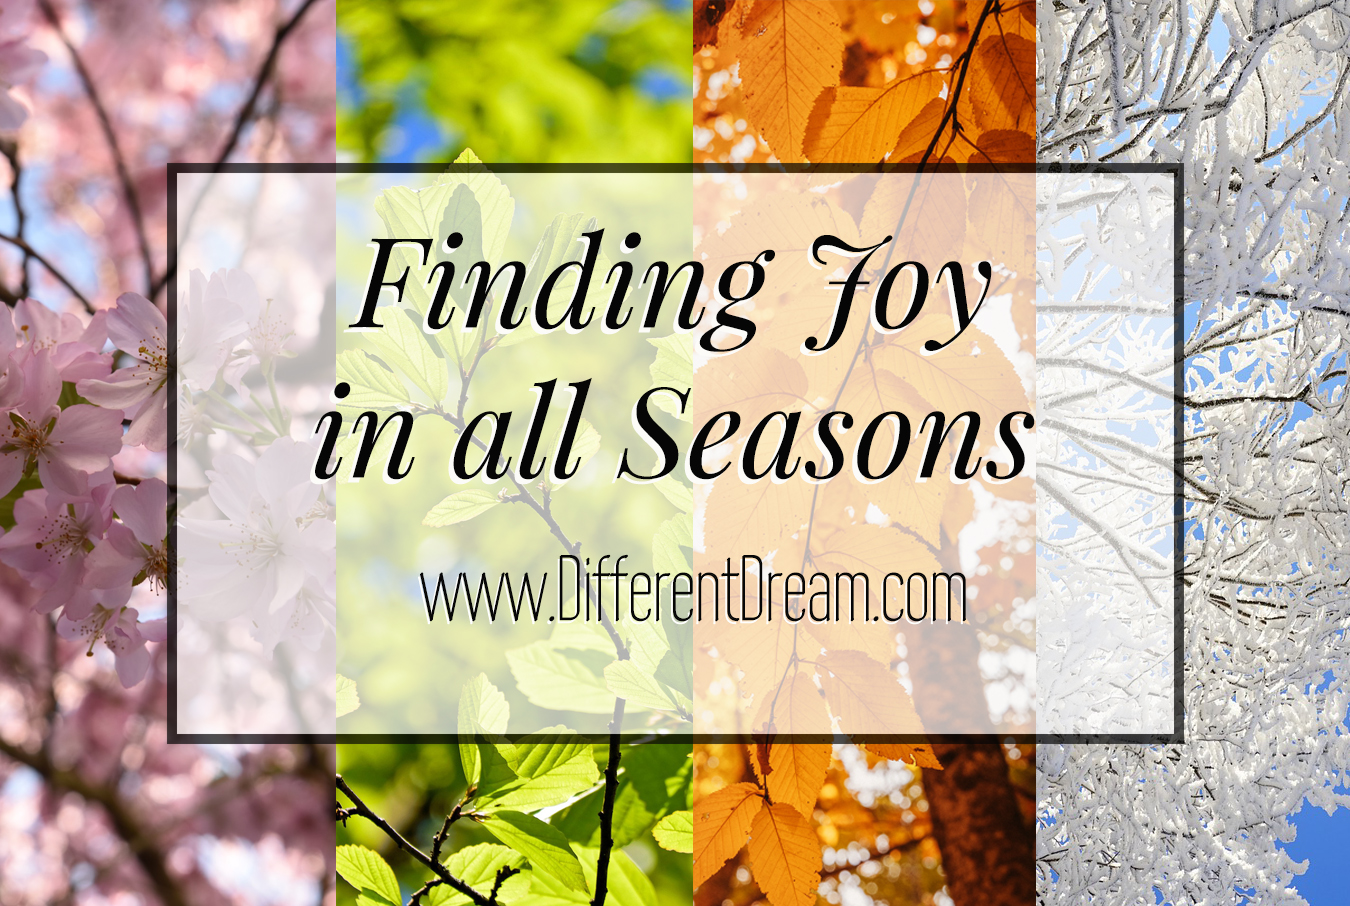 Jolene explains how a recent setback in her health has reminded her that every season has its challenges and joys.